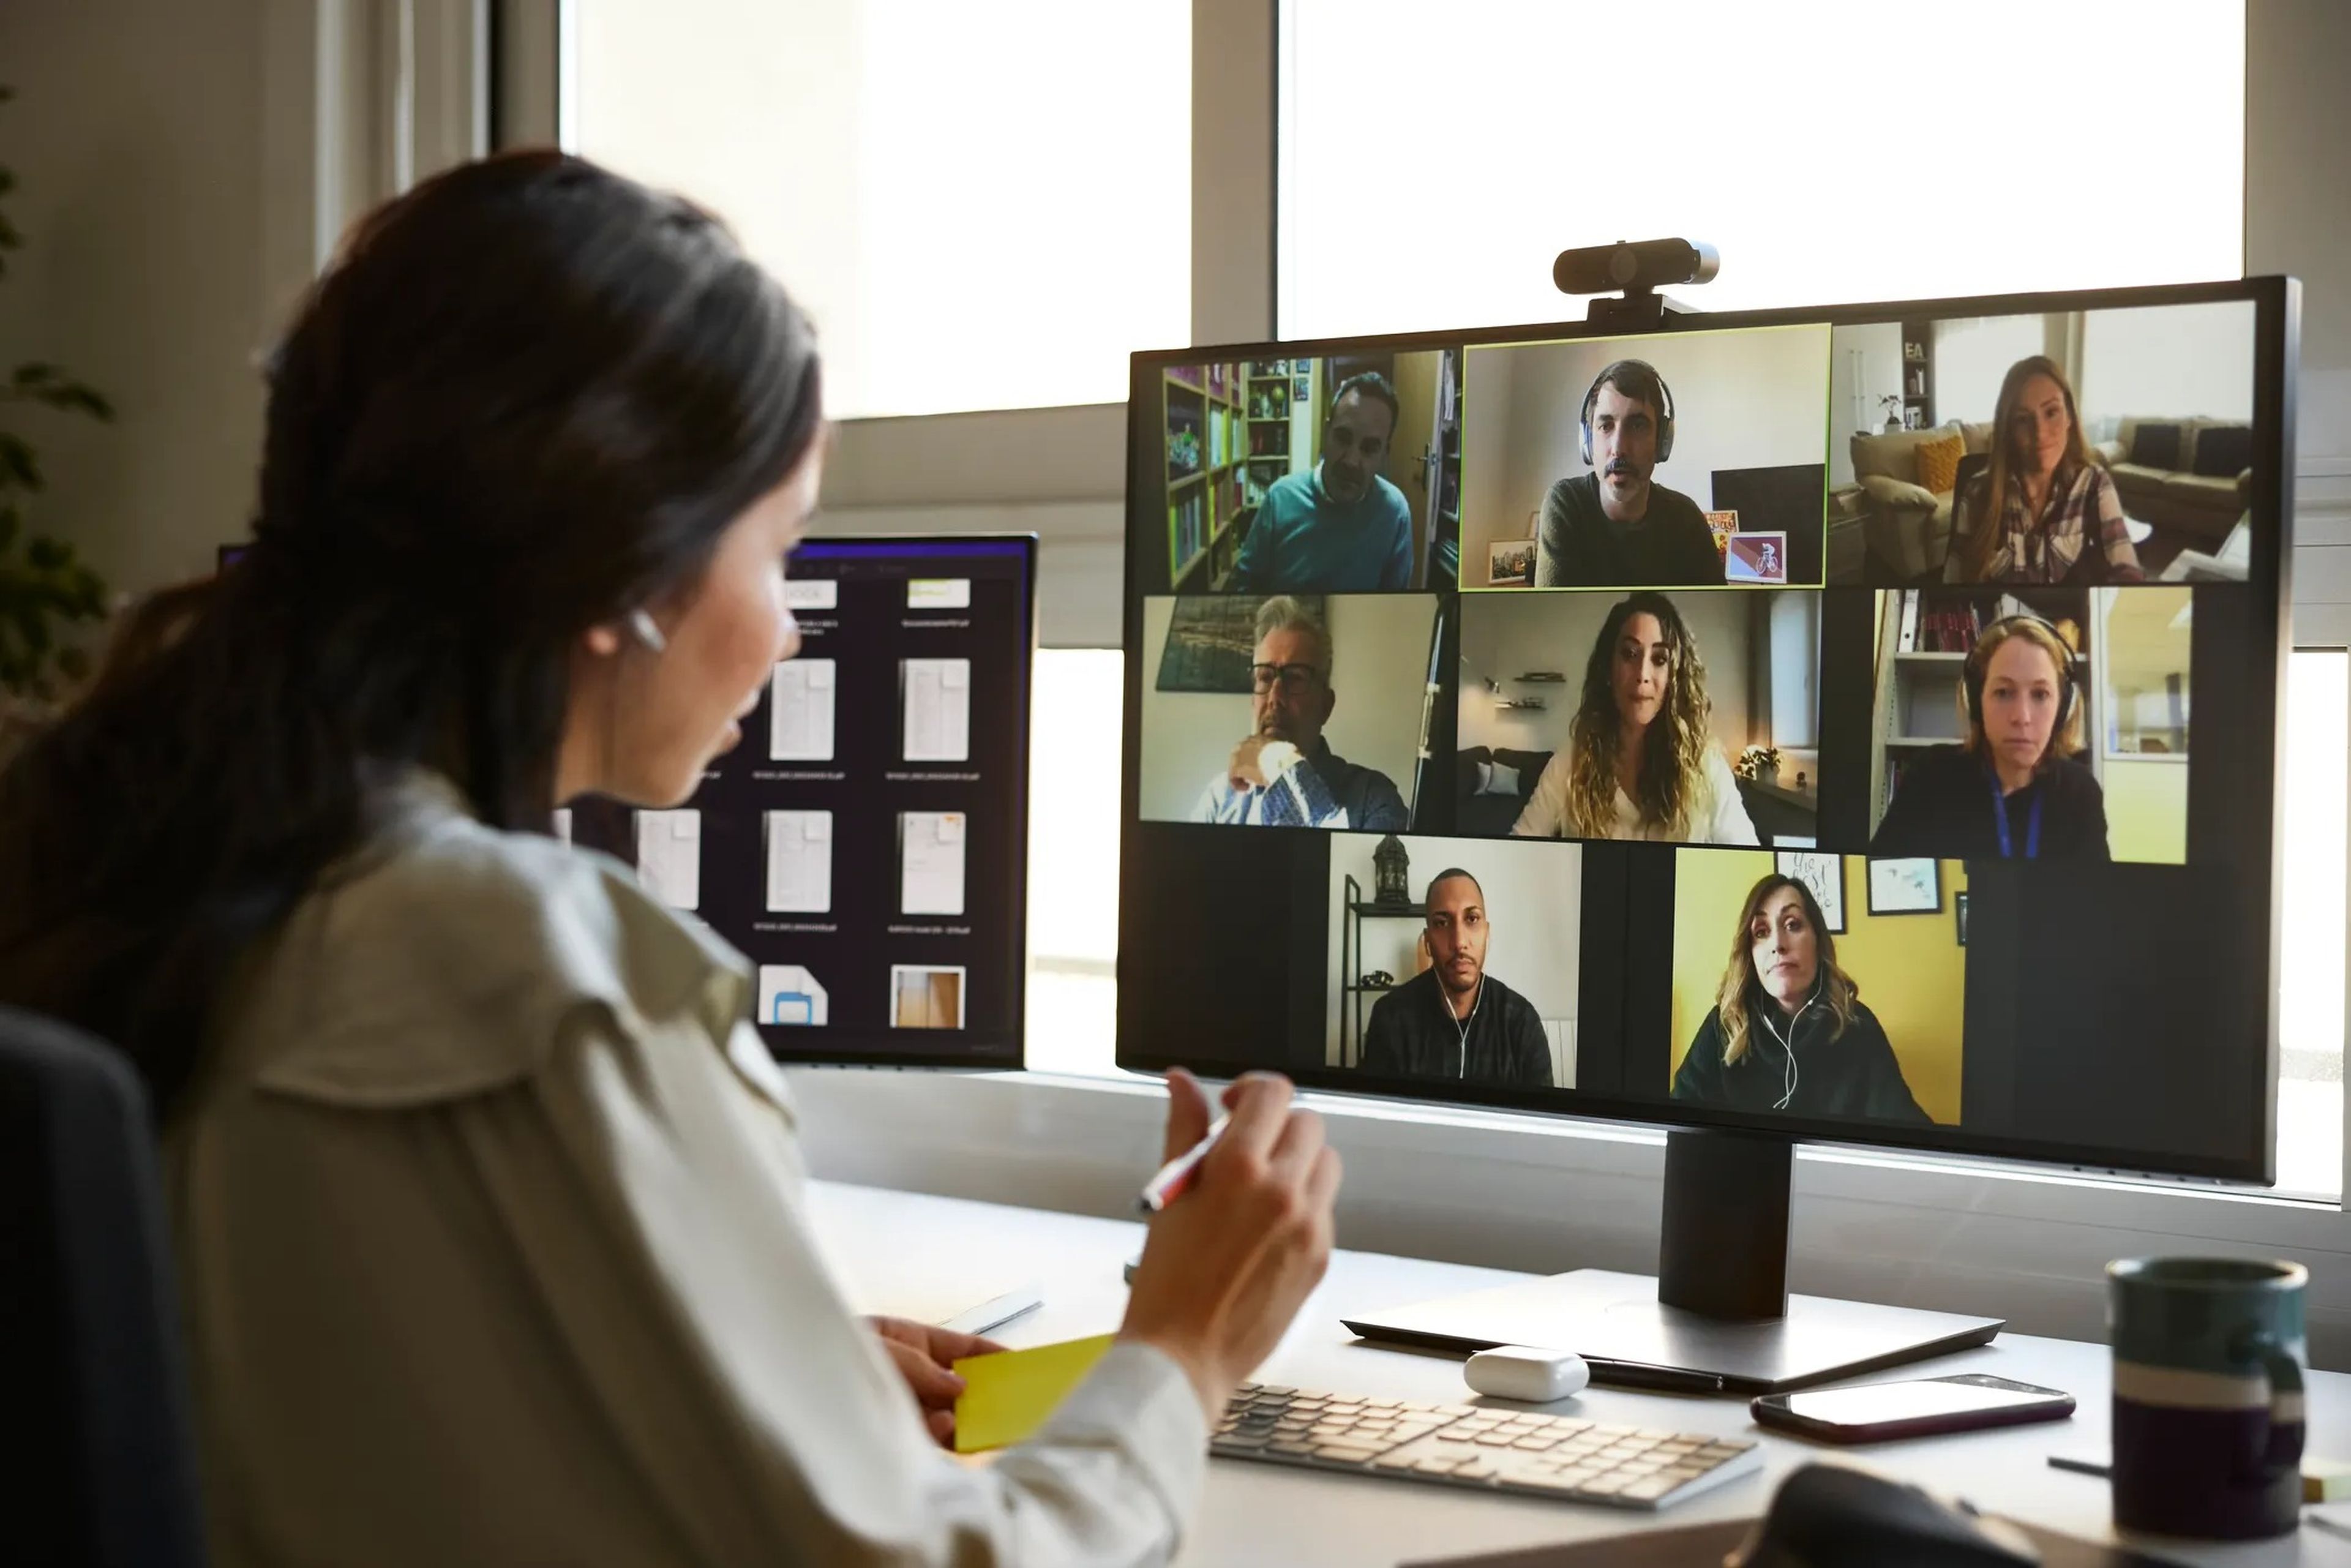 A woman at her desk participating in a video call with multiple other participants visible on the screen.